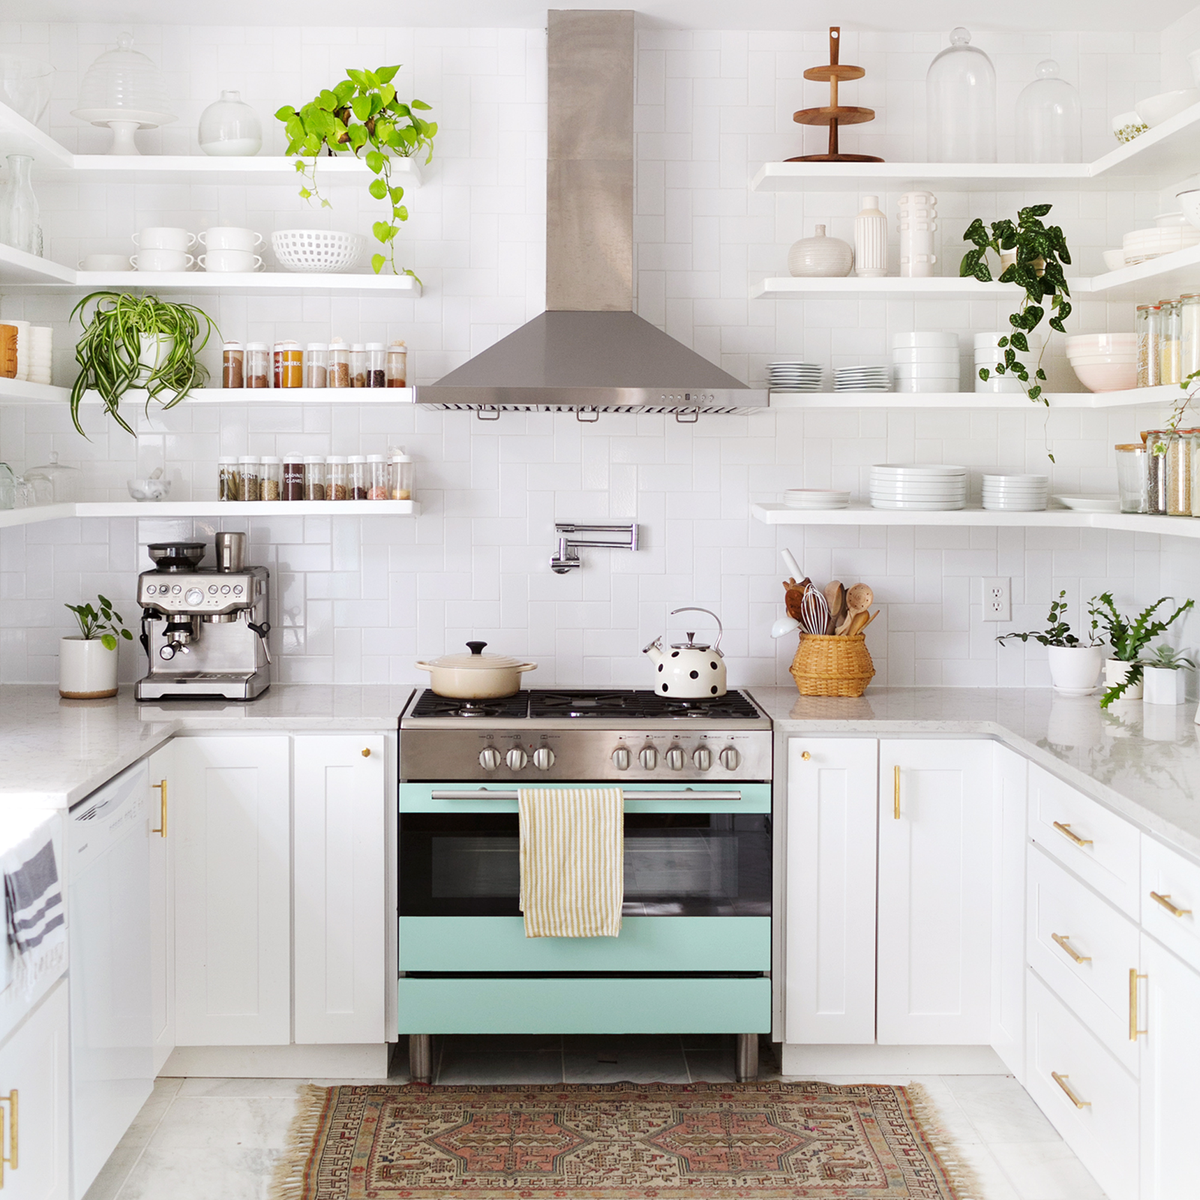 29 Affordable Kitchen Decorating Ideas You Can Do in a Weekend